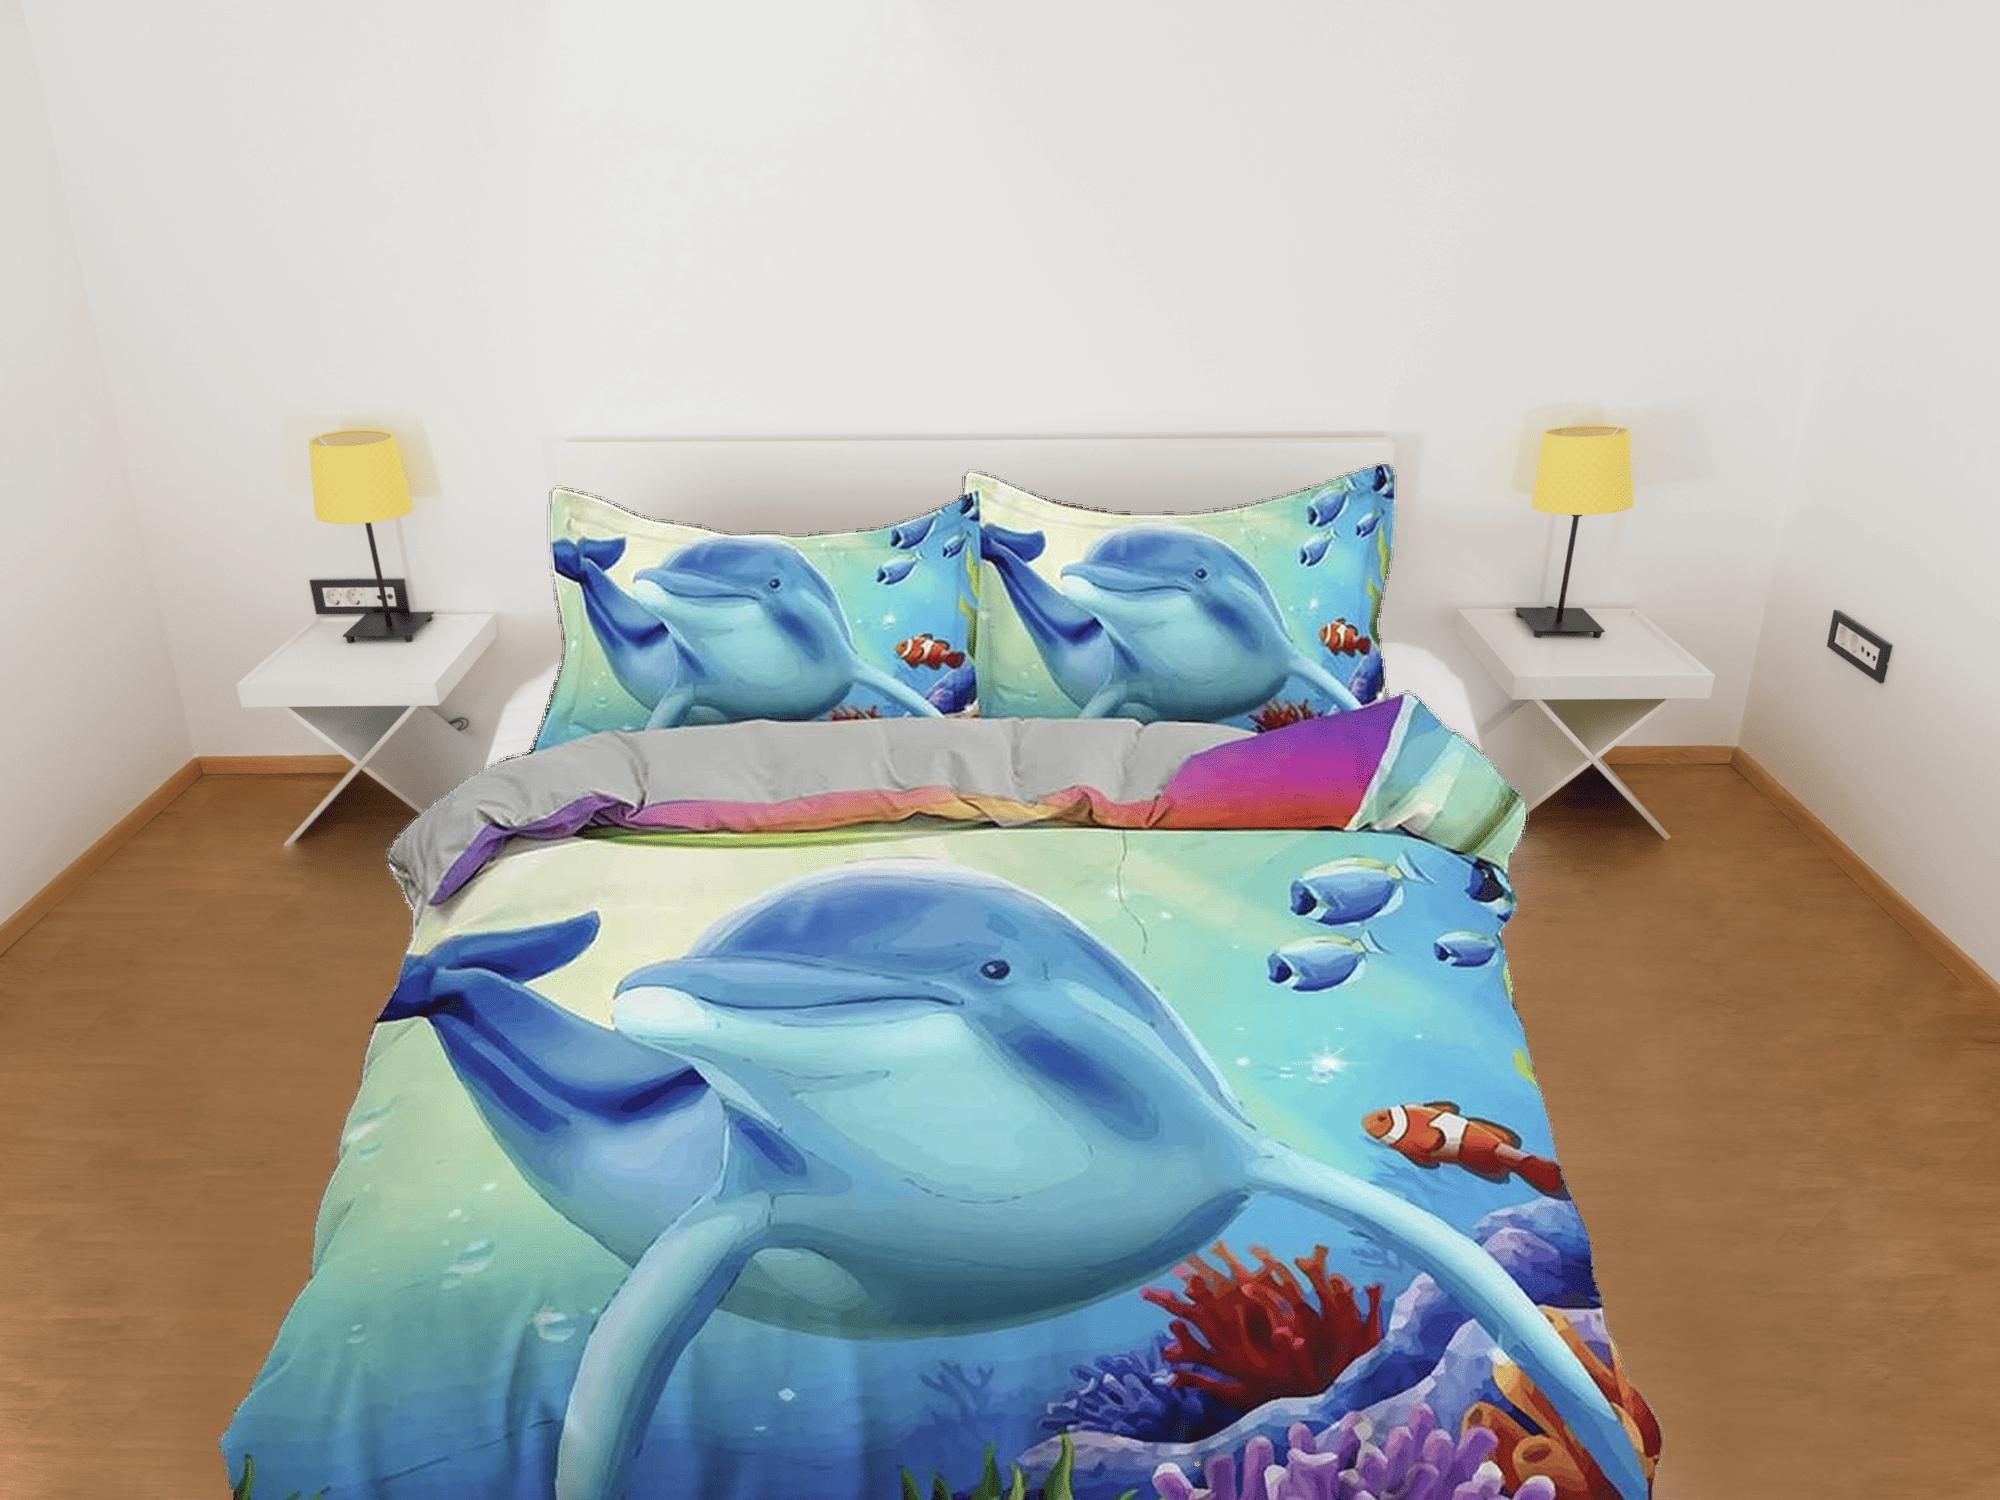 daintyduvet Colorful corals and dolphin bedding duvet cover, ocean blush decor bottle nose dolphin bedding set full king queen twin, dorm bedding gift